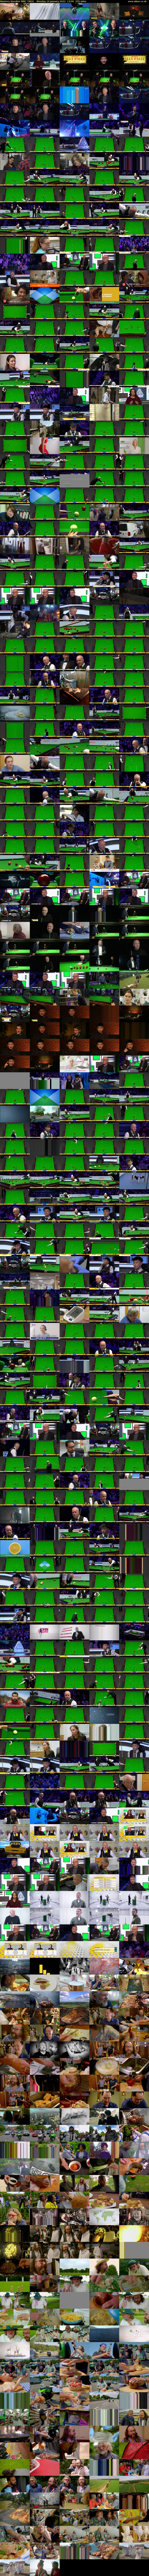 Masters Snooker (BBC TWO) Monday 10 January 2022 13:00 - 17:15